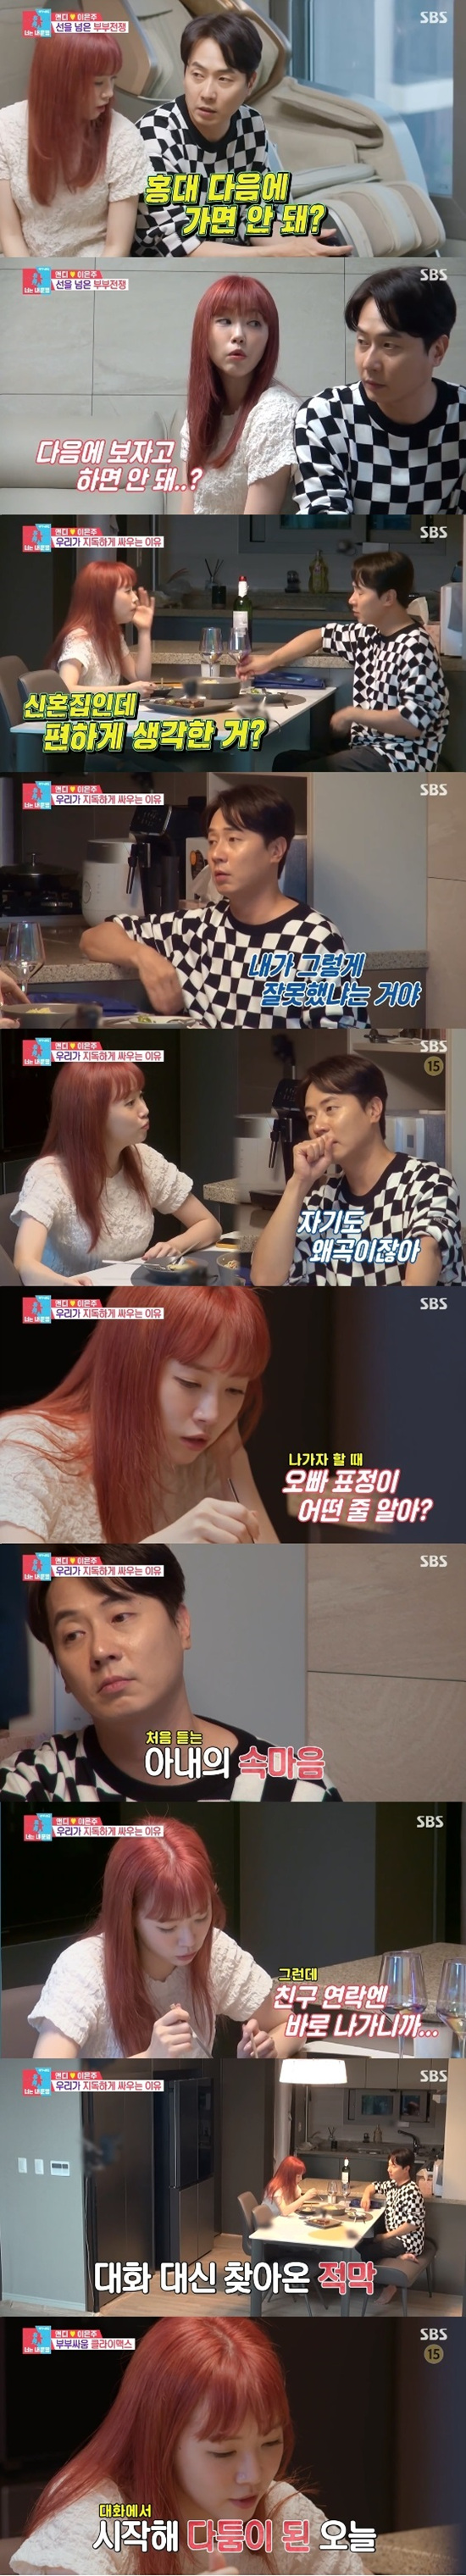 Lee Eun-ju has always revealed that her husbAndy Andy is always more friends than herself.On SBS Same Bed, Different Dreams 2: You Are My Dest - You Are My Destiny broadcast on the 11th, Lee Eun-ju was caught by the public as he was struggling with Andy.Lee Eun-ju dyed in the hair salon on this day Andy tension was raised in the transformation that he had never done before.Lee Eun-ju asked Andy to go to Hongdae Andy do Date.Lee Eun-ju stepped up Andy washed dishes when Andy said he had something to wash to get to Hongdae as soon as possible.But Andy left Lee Eun-ju waiting for Hongdae Date behind Andy went out to meet Friend, who suddenly contacted.Lee Eun-ju was asleep while Andy was out; Andy made a dish to unleash Lee Eun-jus anger Andy woke Lee Eun-ju.Lee Eun-ju said, My brother is feeding me when I am angry. I have often been eating Andy eating, but I think I have to talk to him.Andy told Lee Eun-ju to tell him what he wanted to say first.Lee Eun-ju mentioned the time when she prepared Andy for an answer proposal.Lee Eun-ju said that he had asked for the documentation on marriage preparation to make the situation on the pretext of Chuncheons main house for the Surprise event Andy Andy to go home alone without friends, but eventually failed the event.Lee Eun-ju prepared Surprise, but it was Andys Friends, not Andy, who opened the door; Lee Eun-ju said, Its actually something you could laugh Andy pass on.I just burst into my mind, Andy I finally came back with the Friends again, Andy if I was involved in the Friends meeting, I felt like an uninvited person to say it badly.Andy said that Lee Eun-ju thought he went to Chuncheon at the time Andy while eating with Friends, he asked the Friends to send the document because he could not work on the document.Lee Eun-ju said, If you look at that day, you did not do so wrong. You did only one thing wrong.Andy said, I can talk nicely, but I keep saying what I did so wrong.Lee Eun-ju said with a momentary look, Do you want me to have a hard hobby with you? Do you want me to be big?Were still newlyweds, but we dont have to go to Hongdae. We can just go out in front of Baro.Andy followed Lee Eun-ju to Jeju Andy mentioned his schedule for nine months, saying, Did not you talk about it? I can go to Seoul Andy meet people Andy be busy.He said he understood enough.Lee Eun-ju said: This is not a situation once or twice.I always like to play with friends rather than friends Andy Date than me. Andy Andy Lee Eun-ju practiced telling jokes Andy talking in a way that does not get angry with each other through dragon Andy sam conversation.Photo: SBS broadcast screen